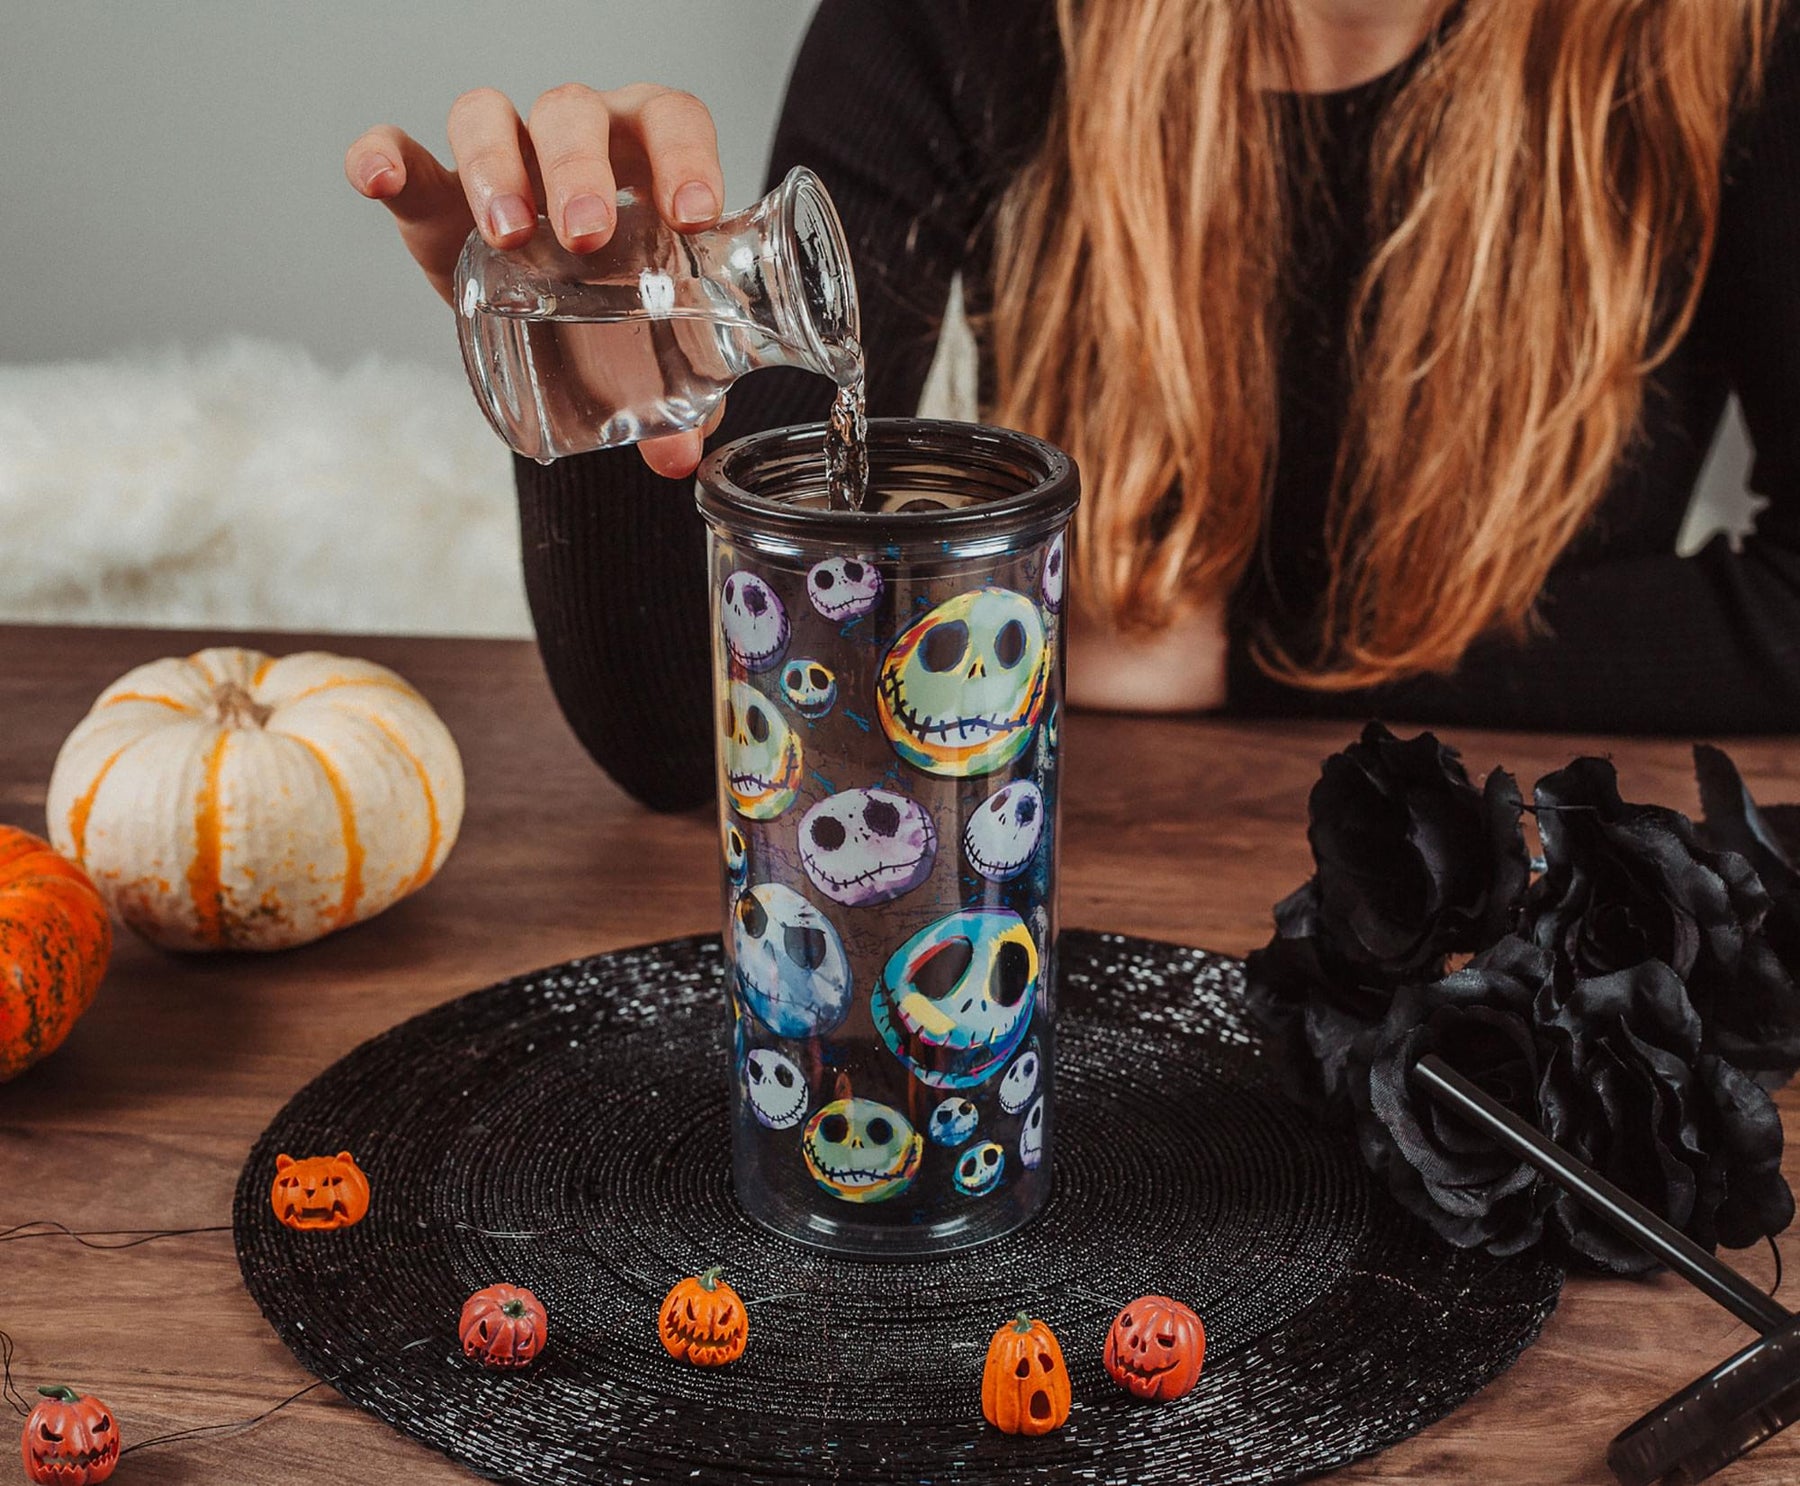 Disney The Nightmare Before Christmas Jack Skellington Faces Carnival Cup